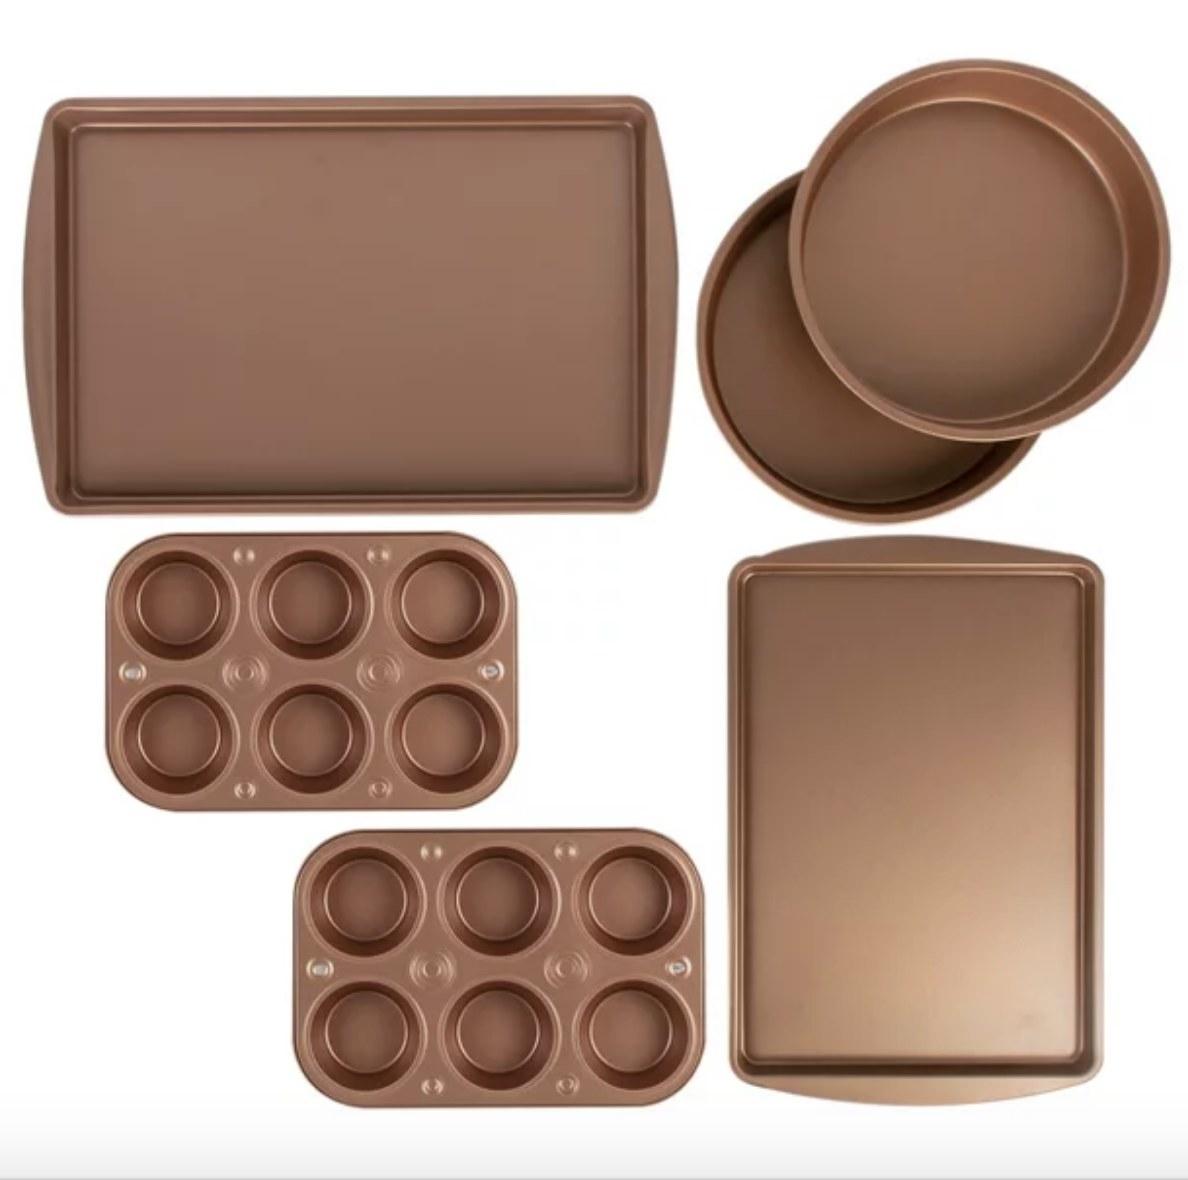 Six piece copper bakeware set, from left to right on top: medium cookie sheet, two round cake pans. From left to right on bottom: two muffin pans, smaller cookie sheet